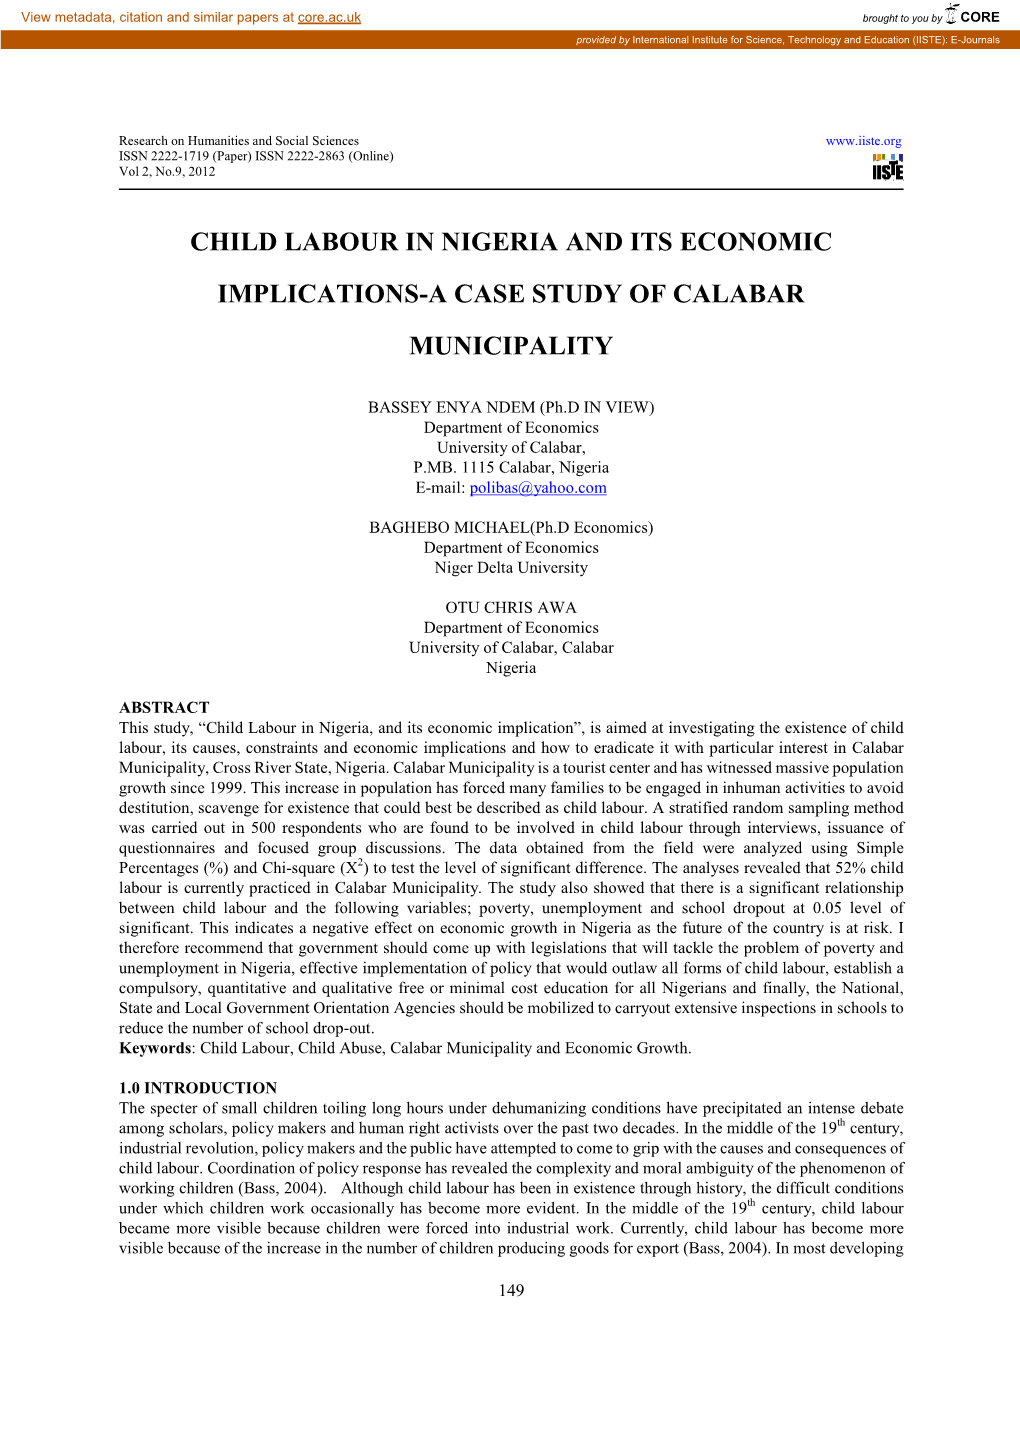 Child Labour in Nigeria and Its Economic Implications-A Case Study of Calabar Municipality